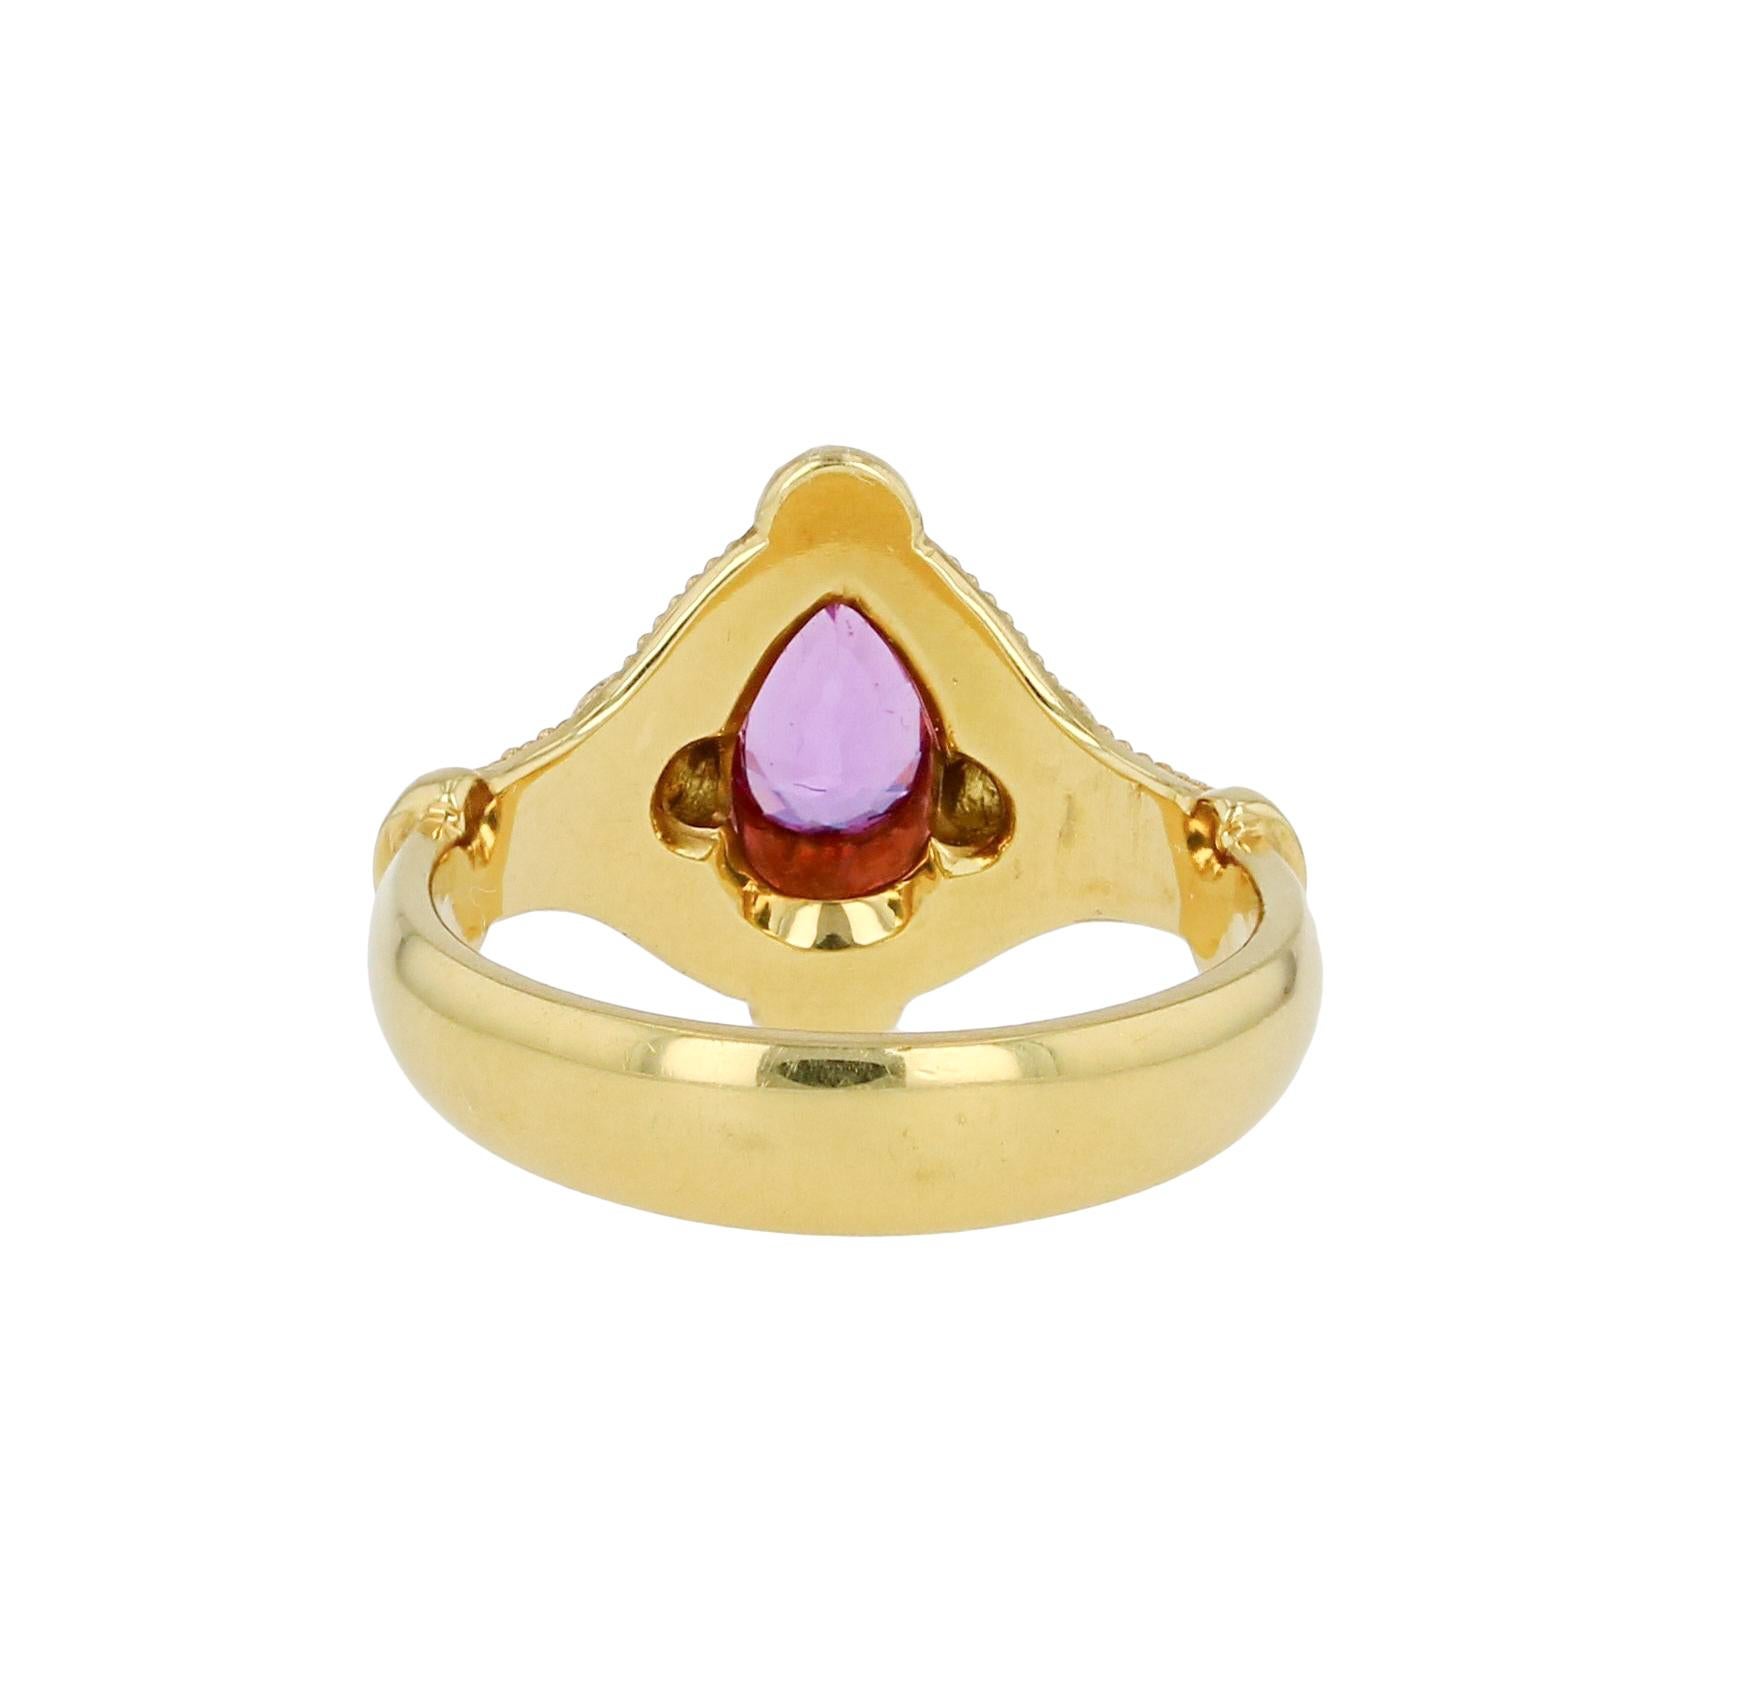 Kent Raible 18 Karat Gold Pink Sapphire, Diamond Ring with Fine Granulation In New Condition For Sale In Mossrock, WA